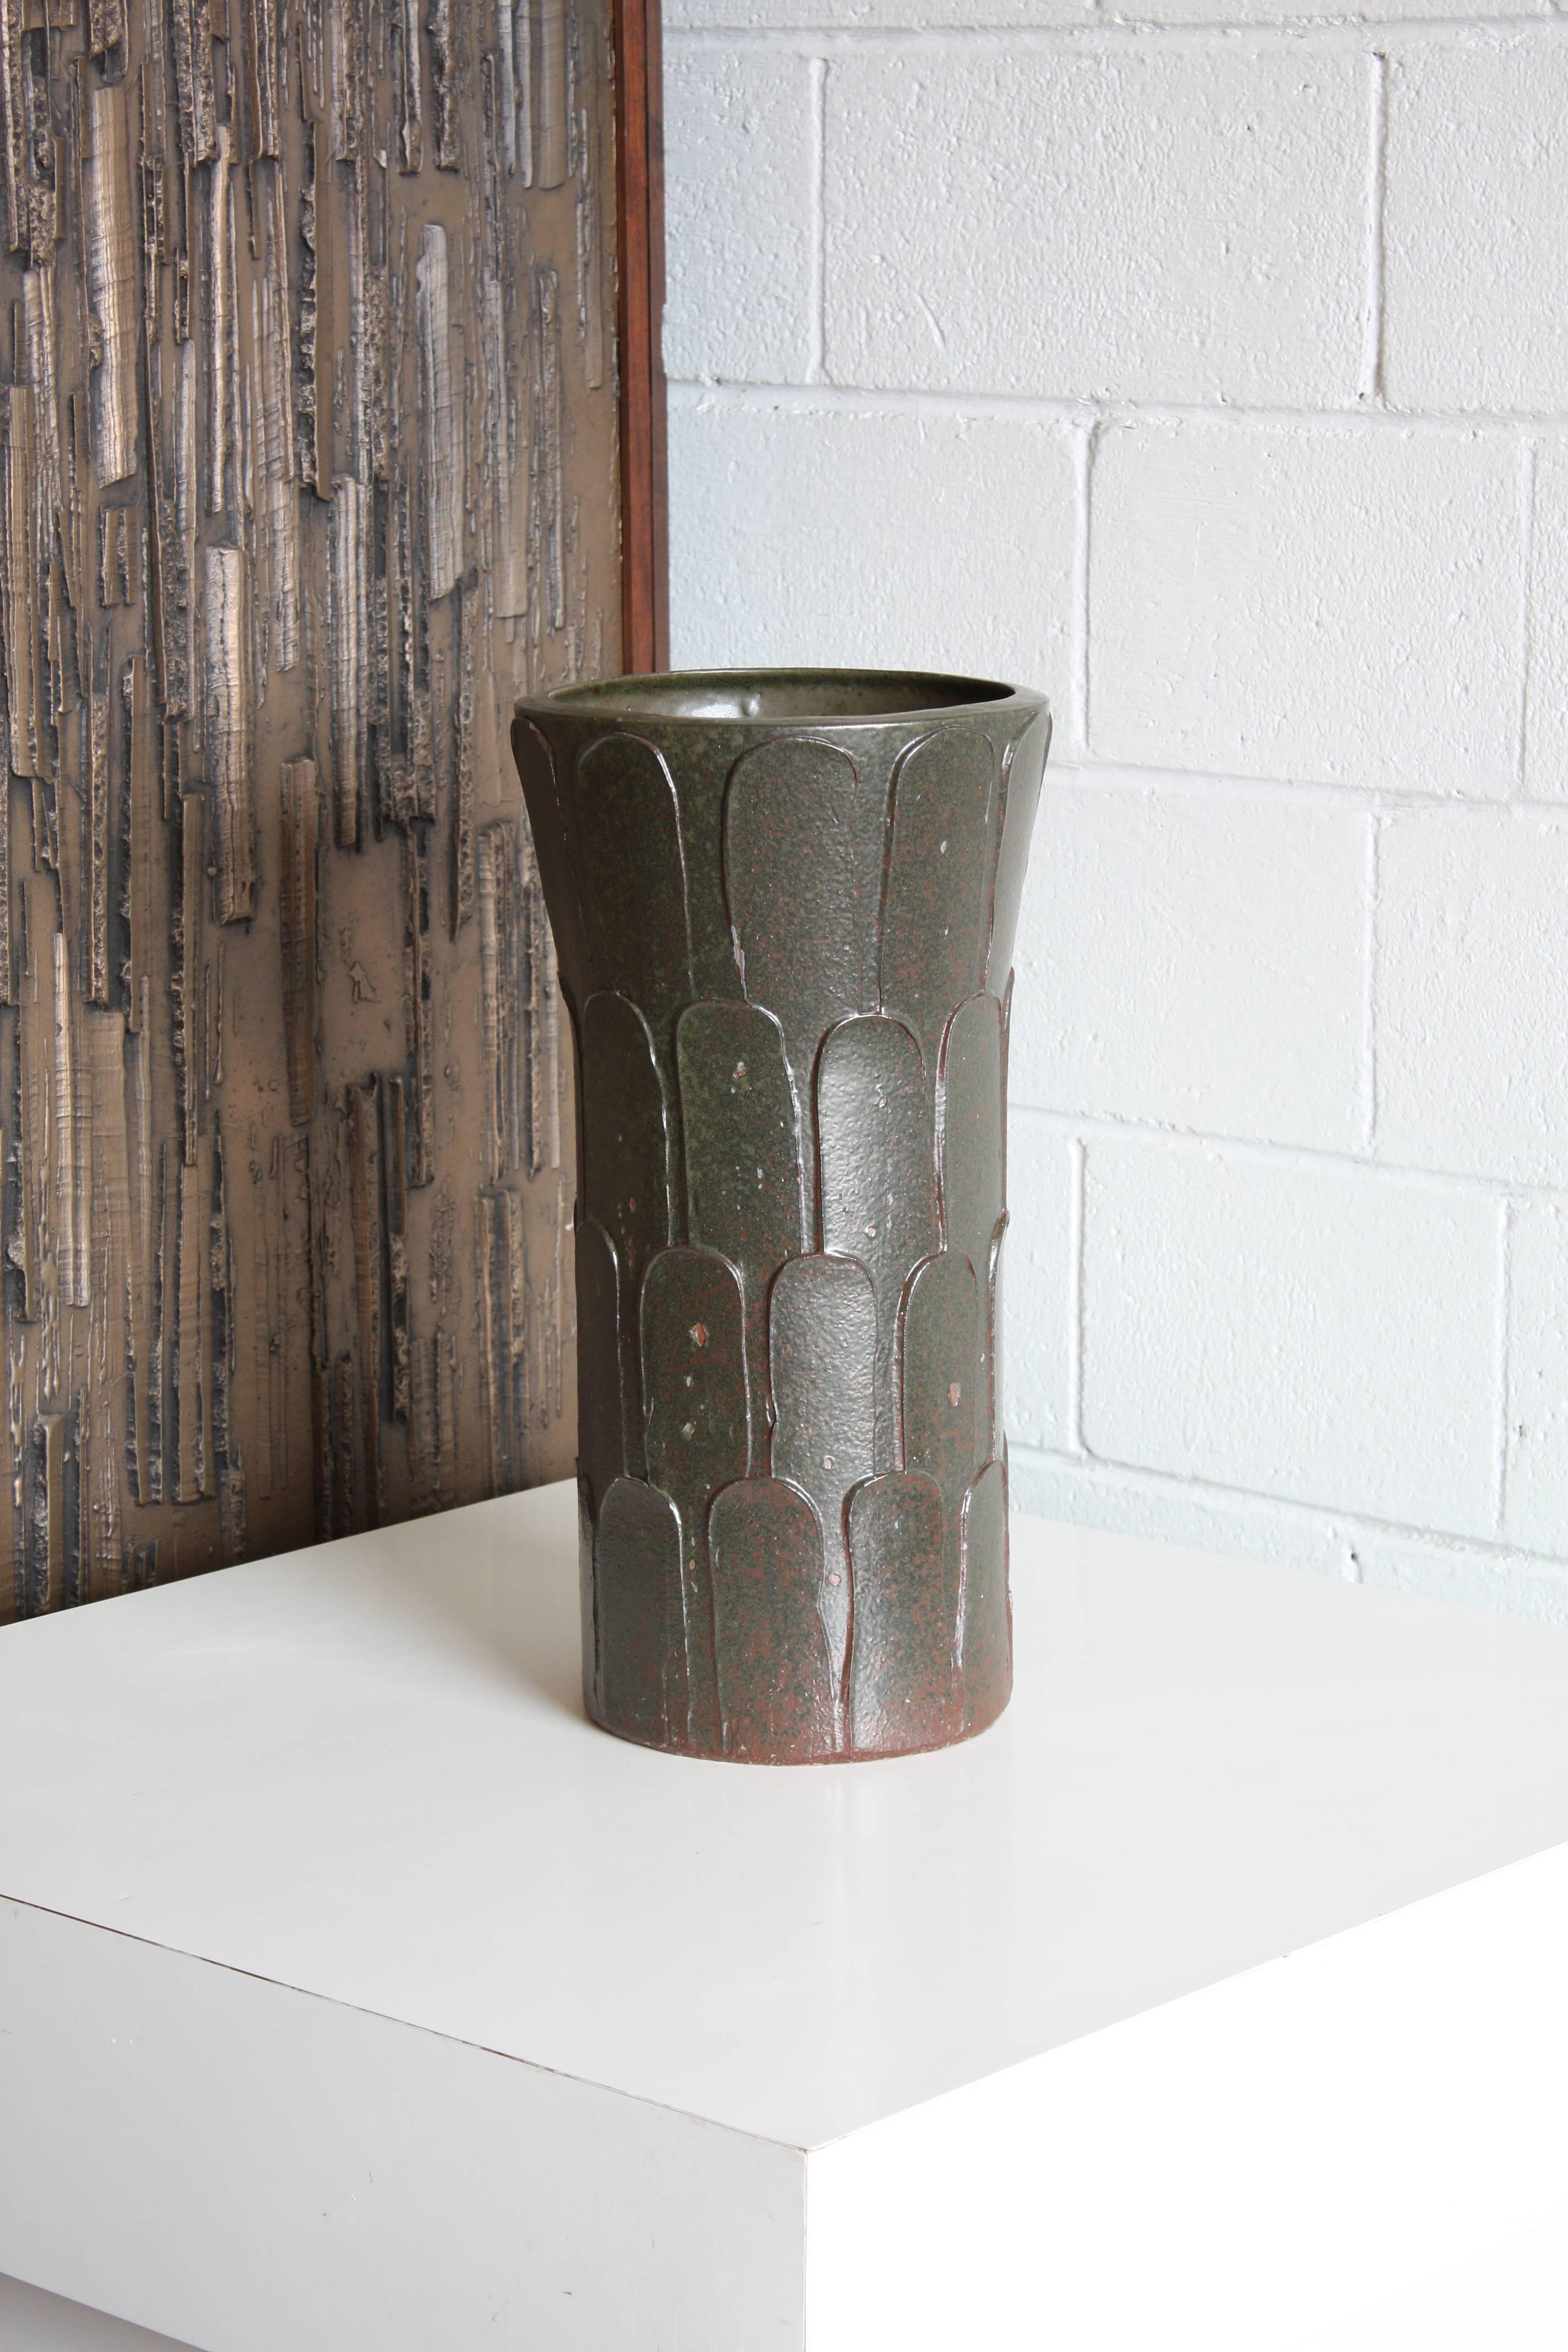 American Umbrella Stand or Pot by David Cressey for Architectural Pottery